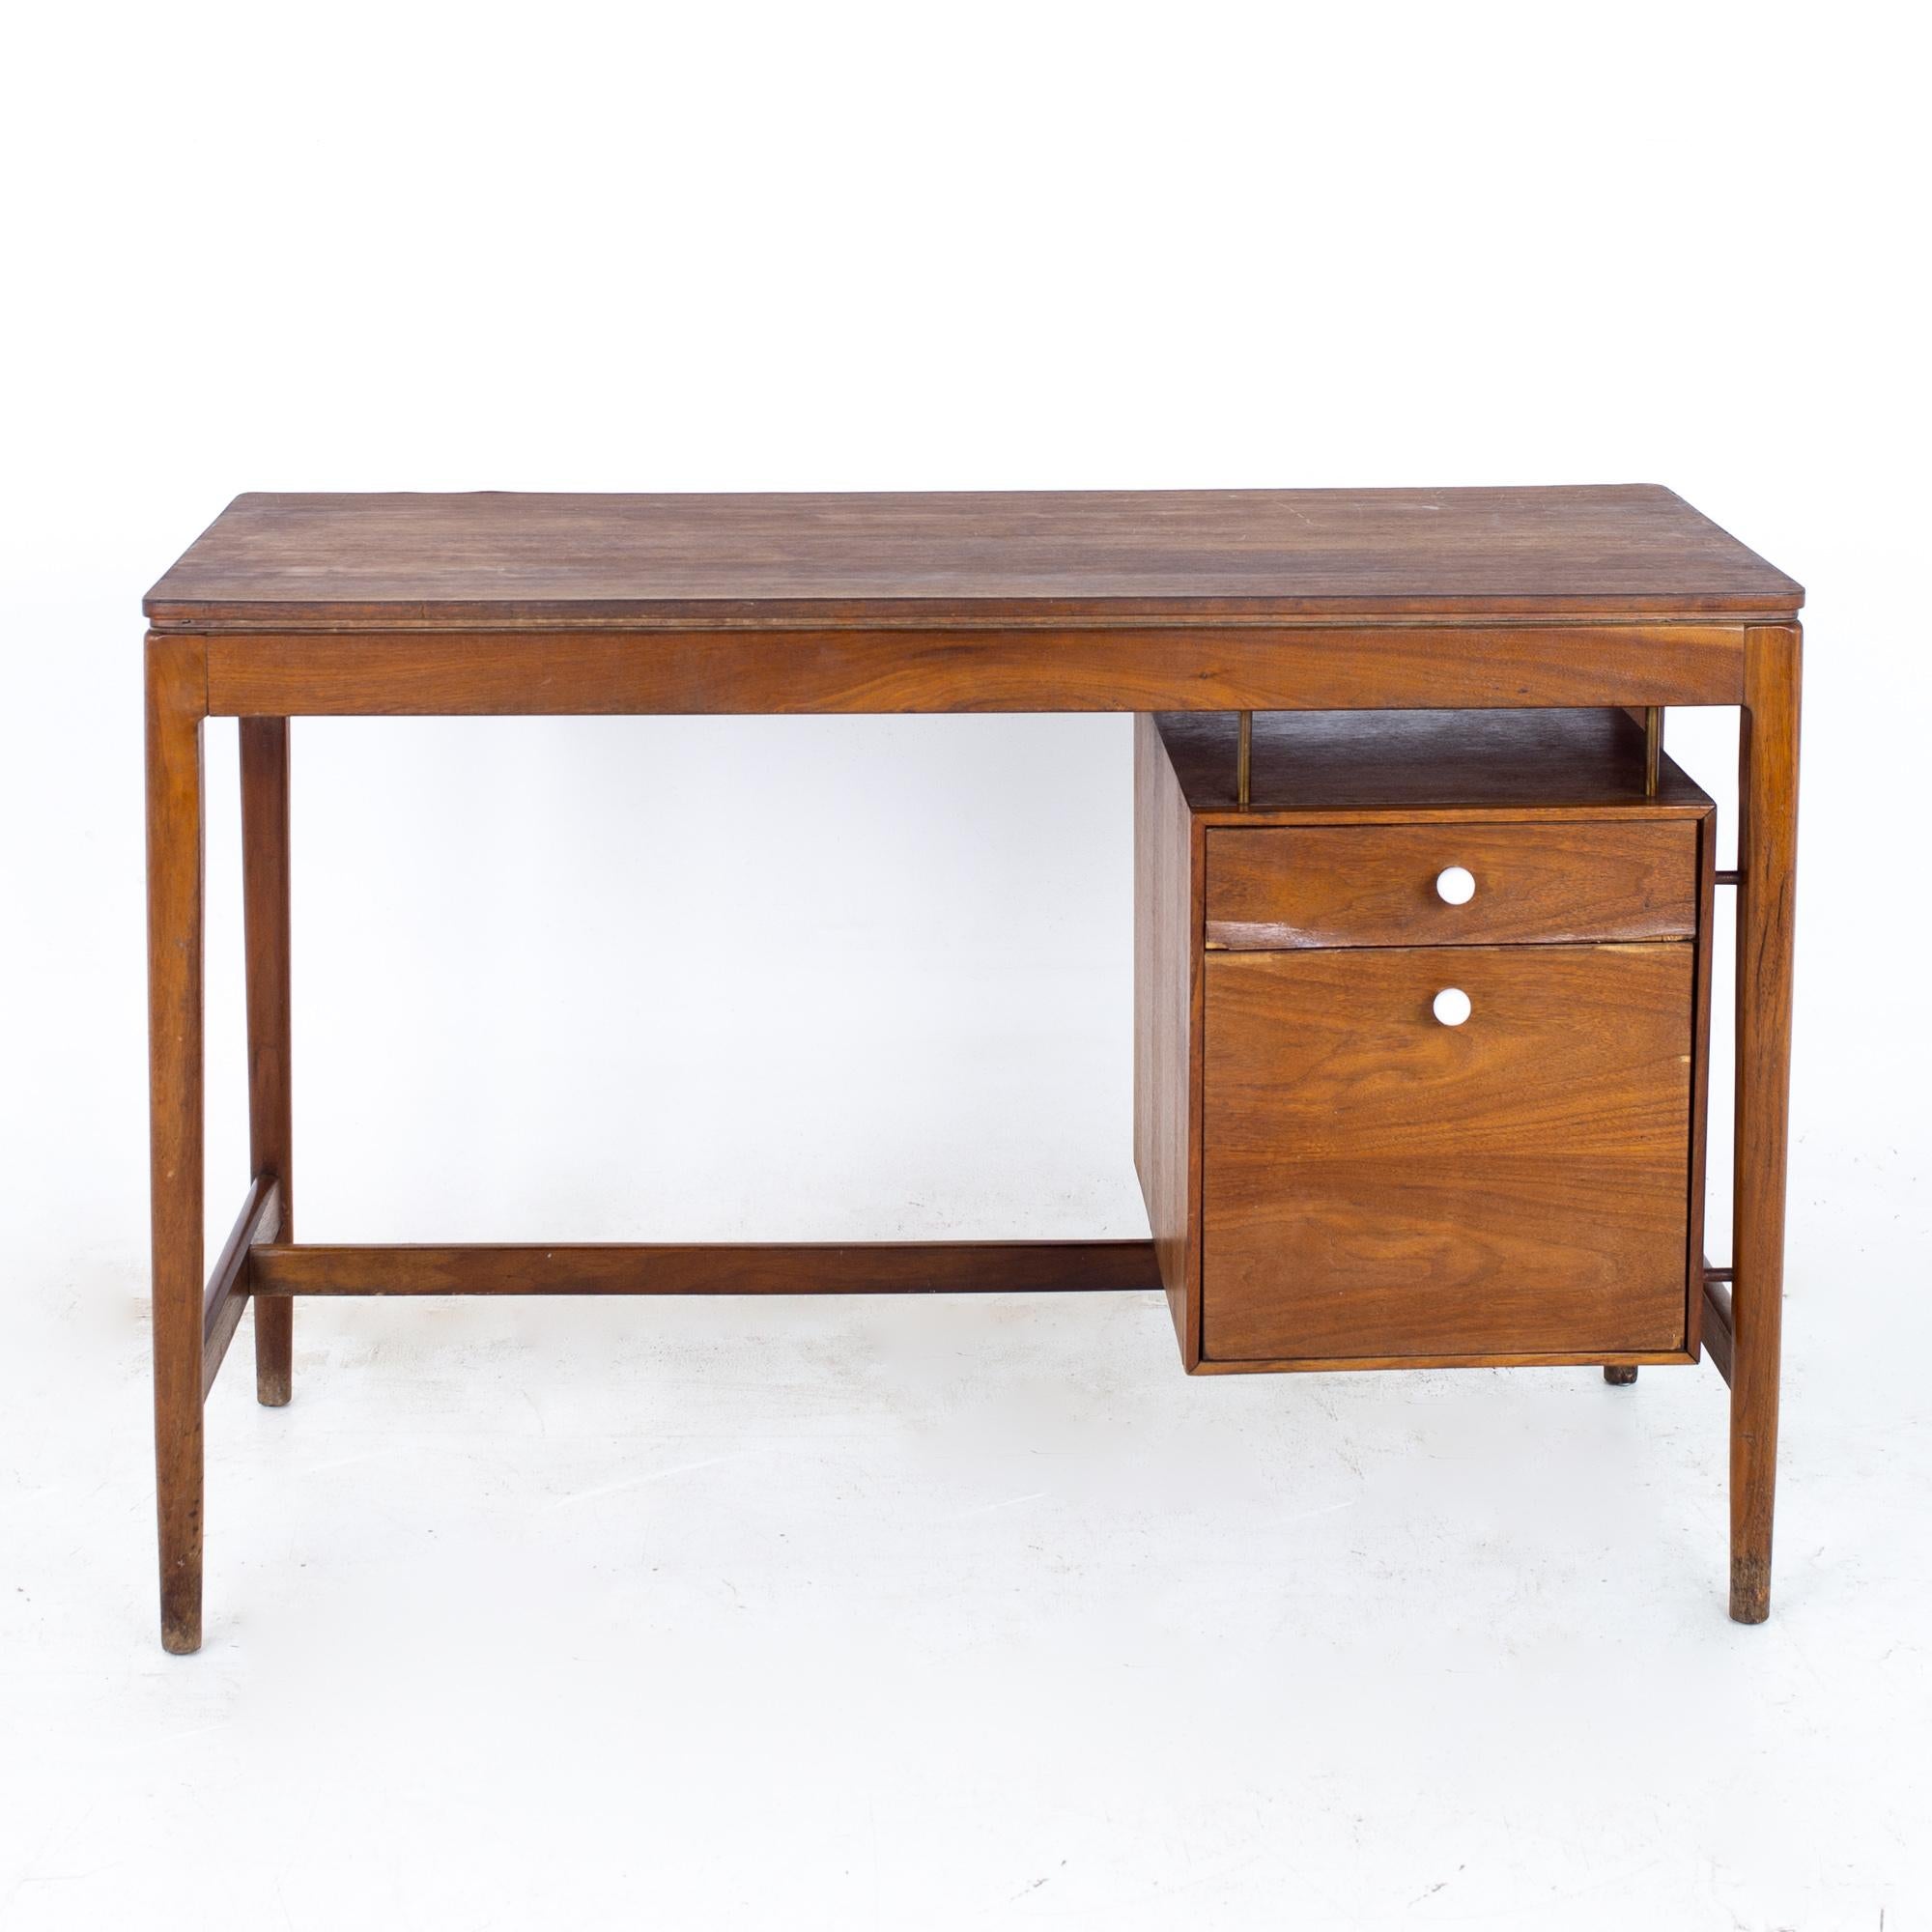 Kipp Stewart for Drexel Declaration Mid Century walnut desk

Desk measures: 44 wide x 20 deep x 29 inches high

All pieces of furniture can be had in what we call restored vintage condition. That means the piece is restored upon purchase so it’s